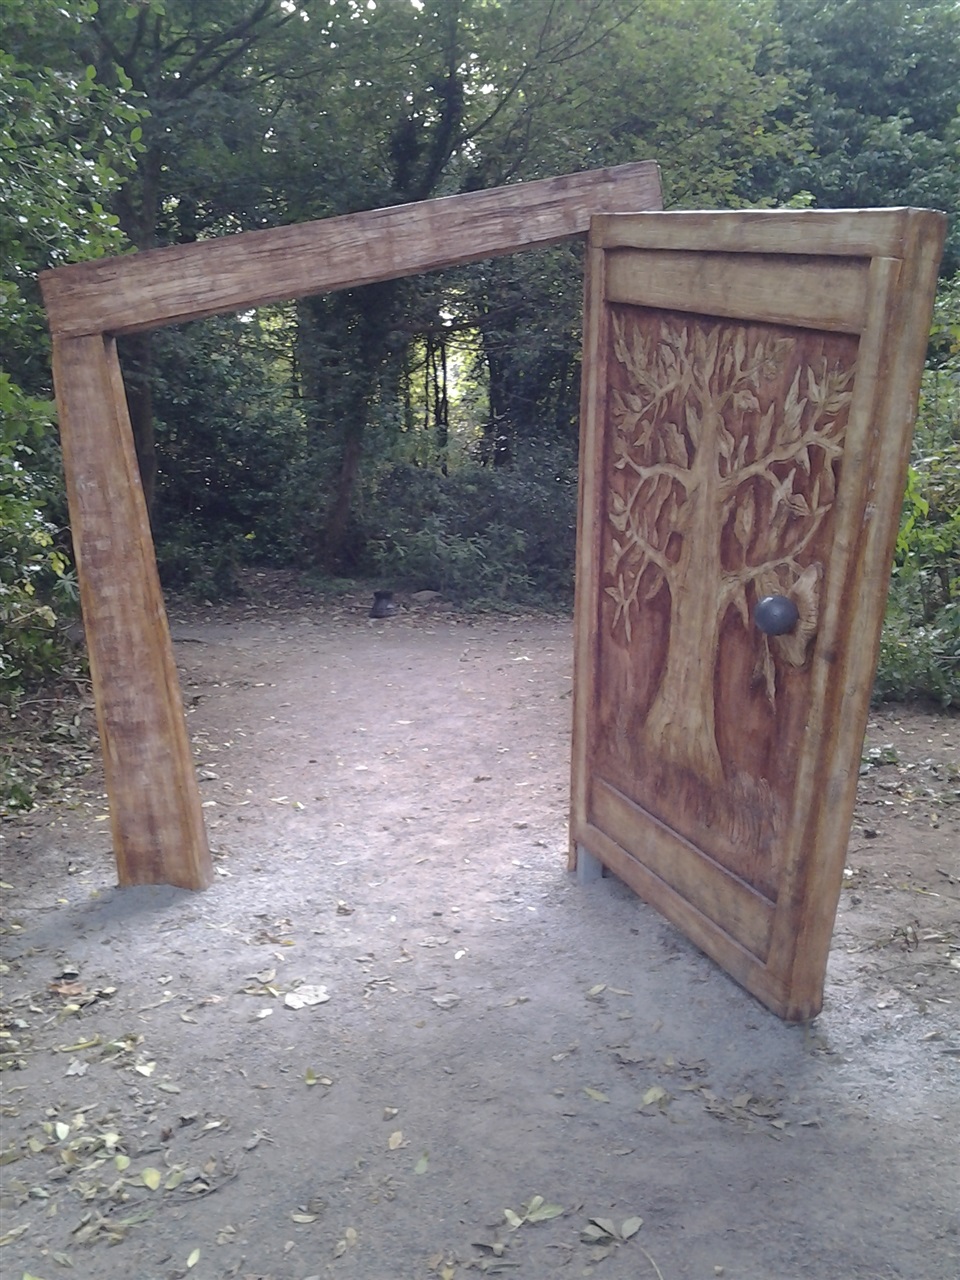 The Narnia Trail